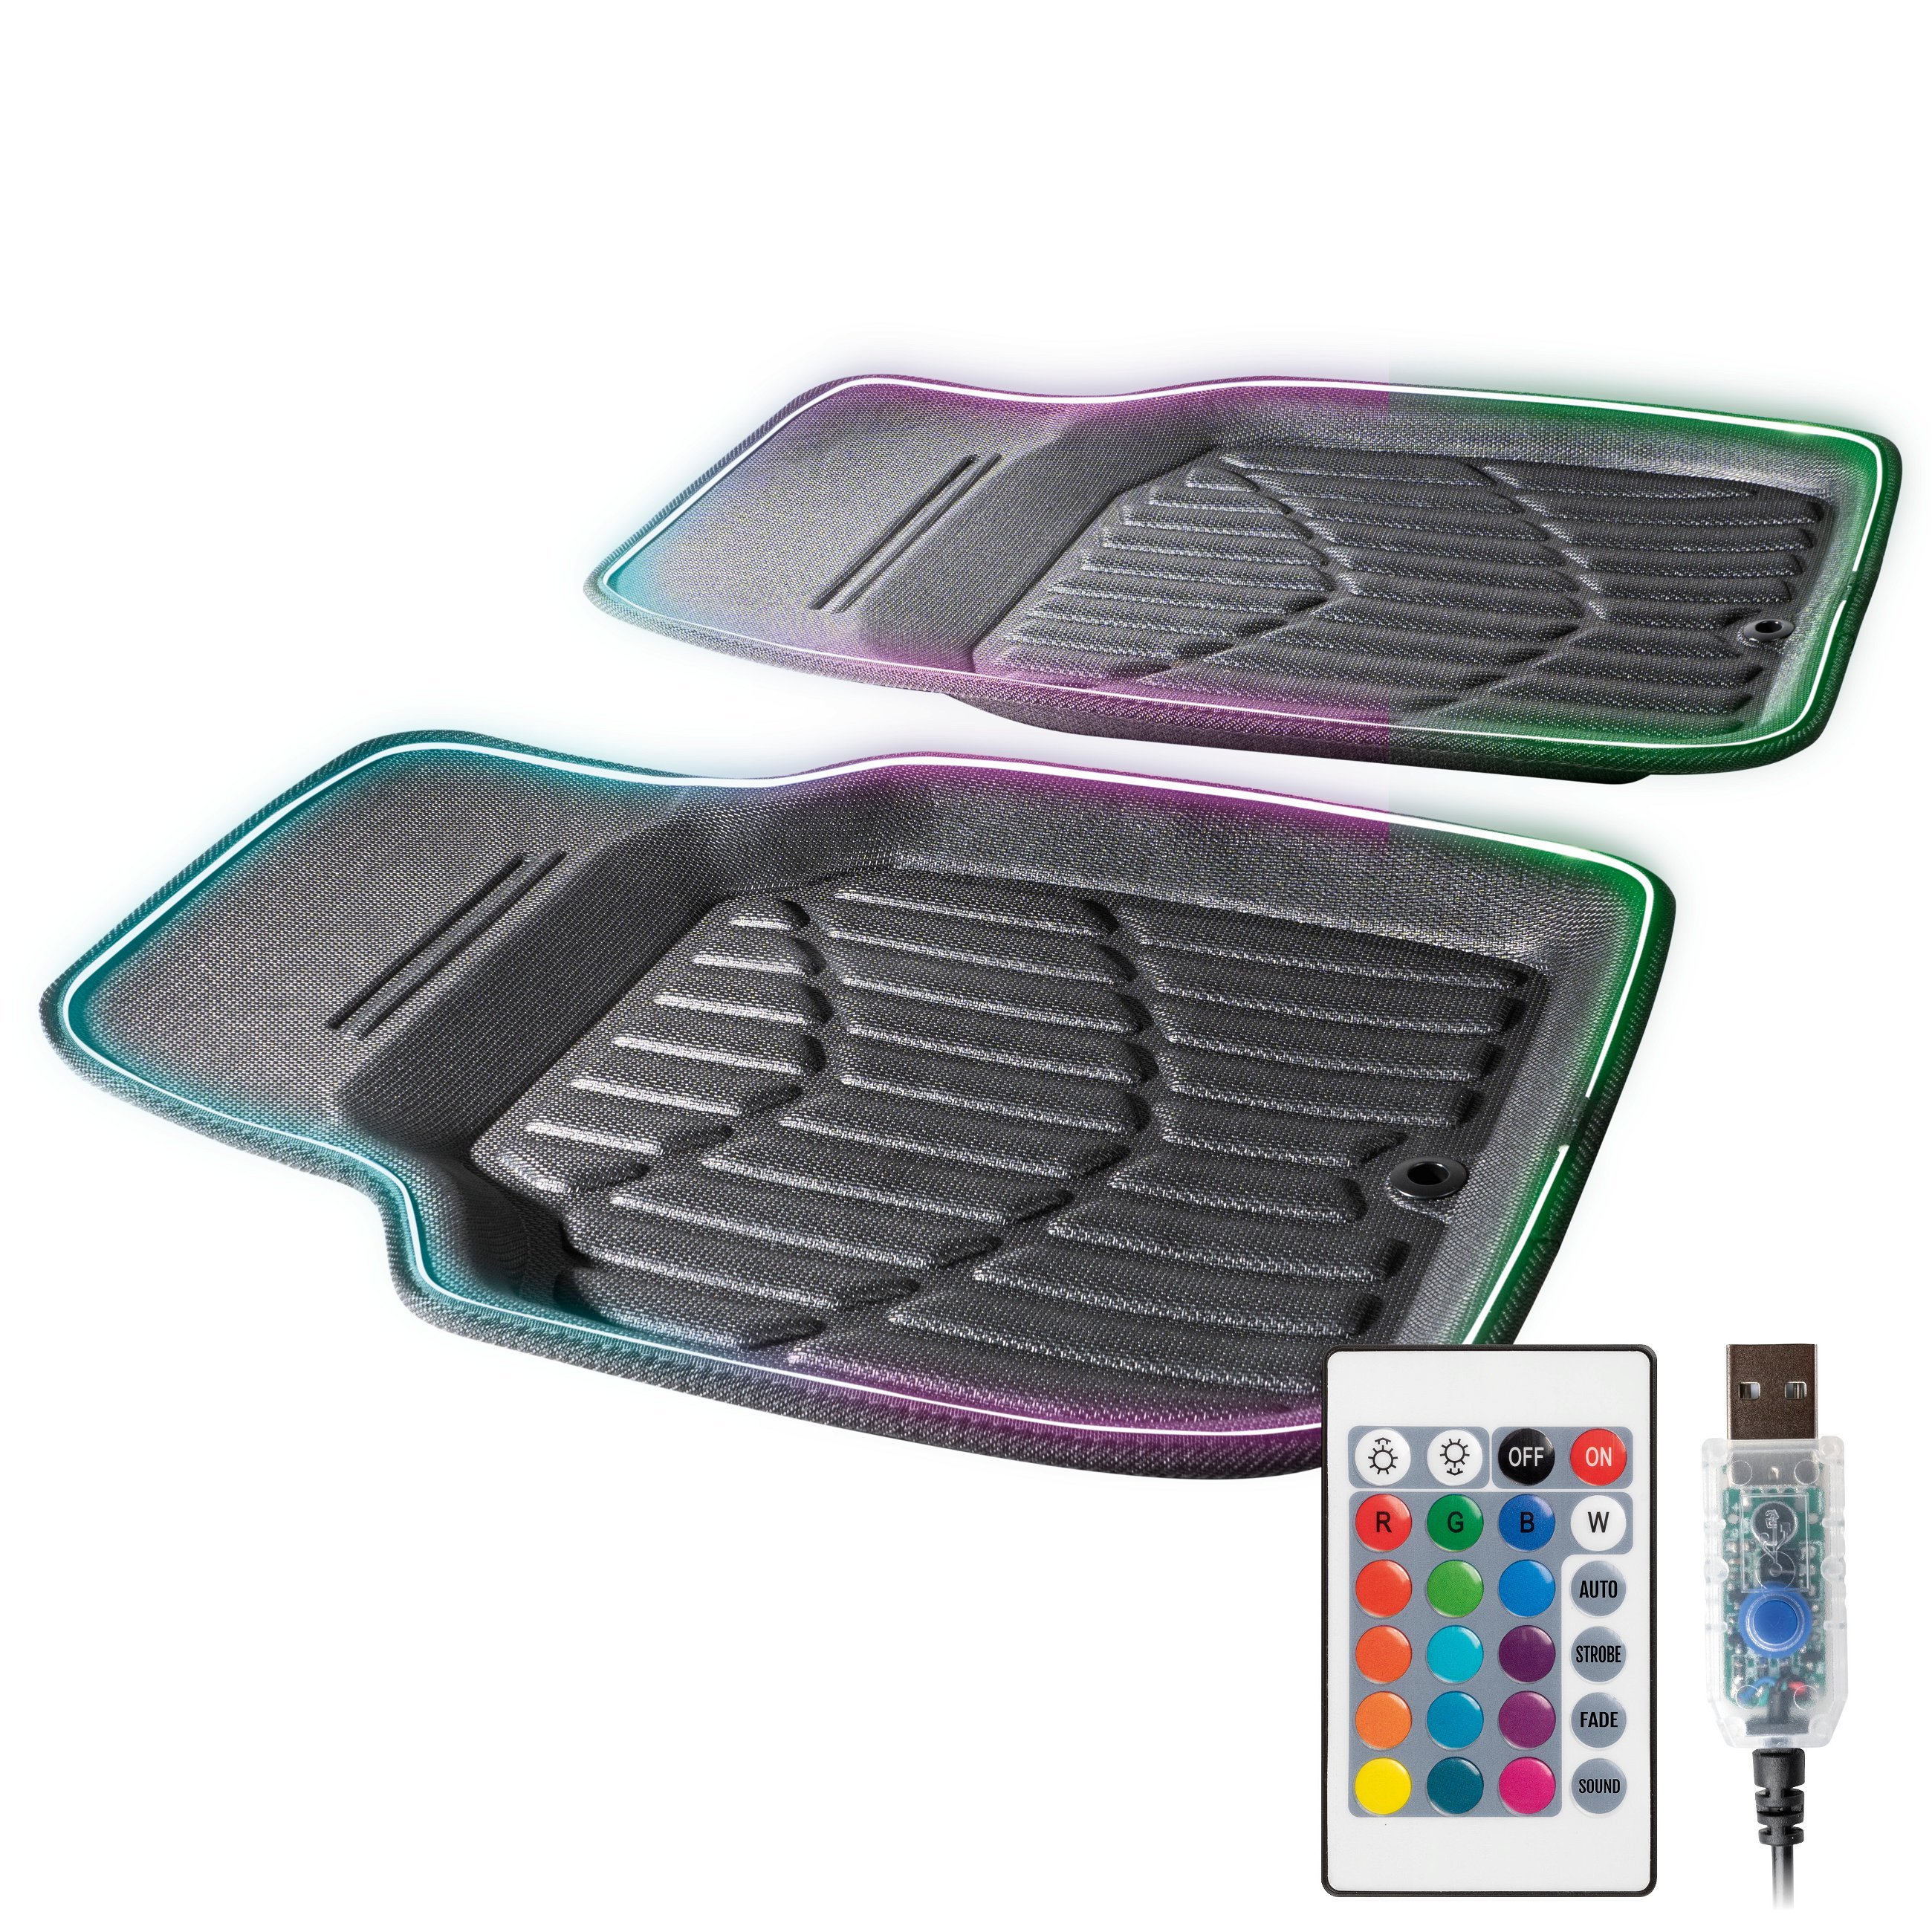 LED rubber mat Glow with colour selection, various light functions and remote control for ambient lighting